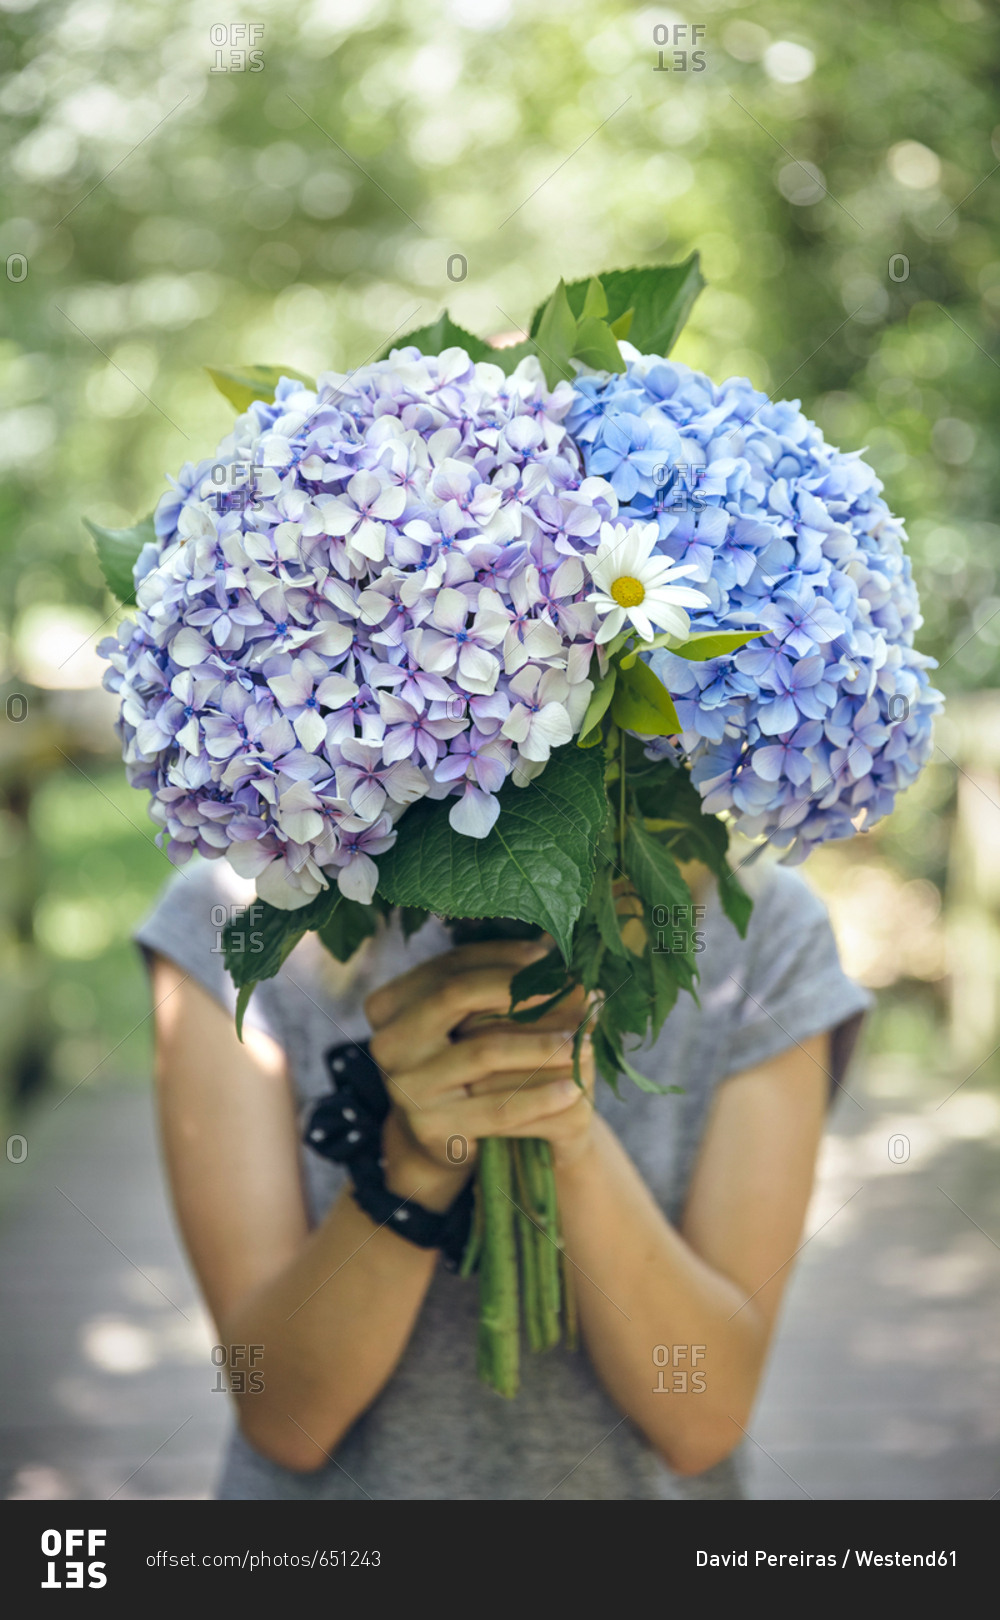 Unrecognizable young woman hiding behind a bouquet of hydrangeas